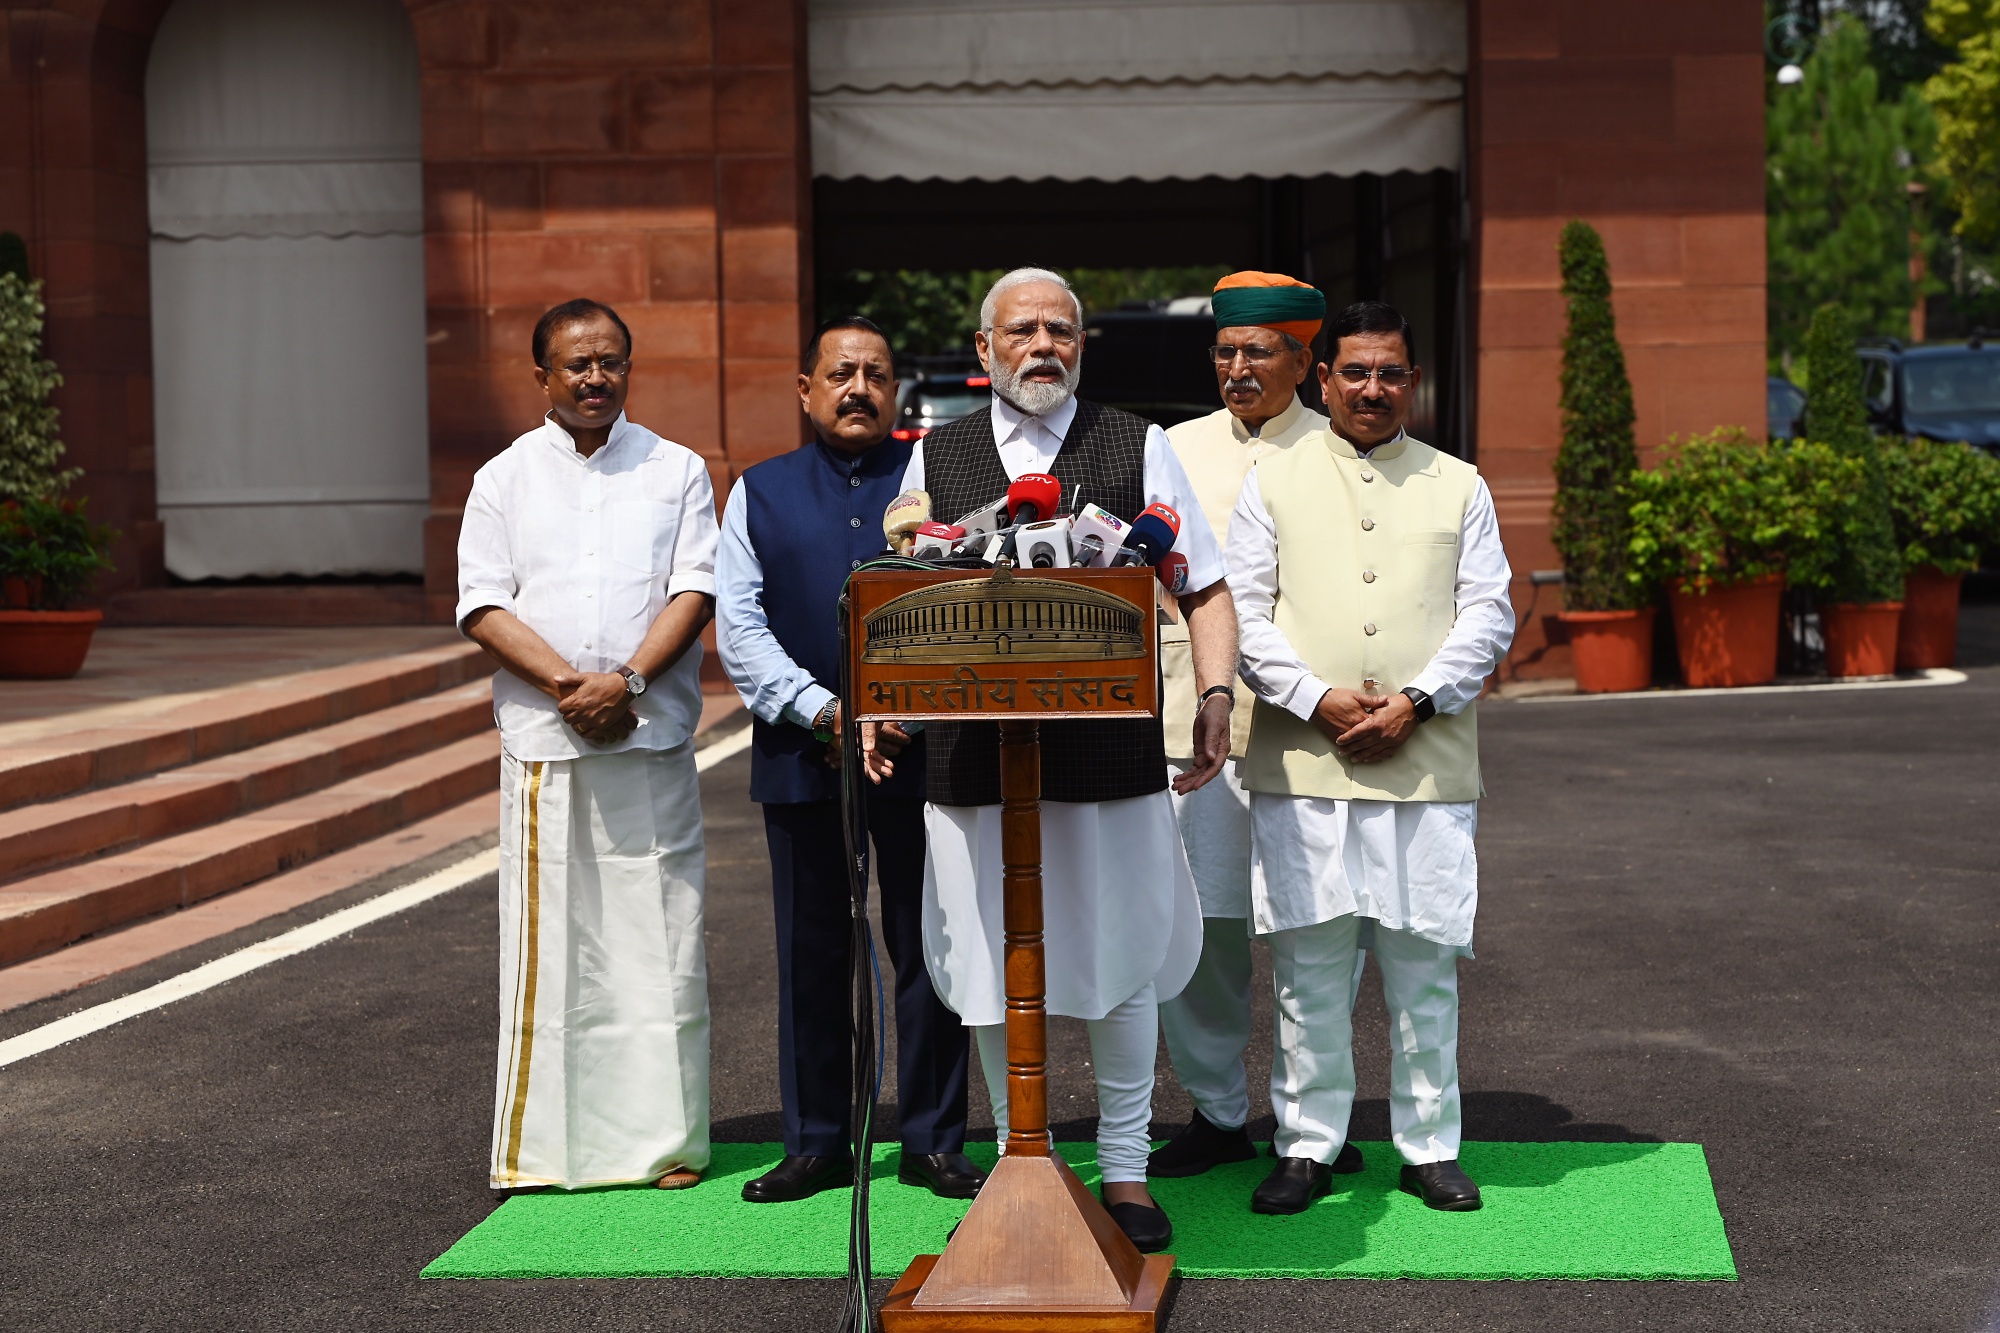 Watch: PM Modi's security detail seems up to the task as he takes